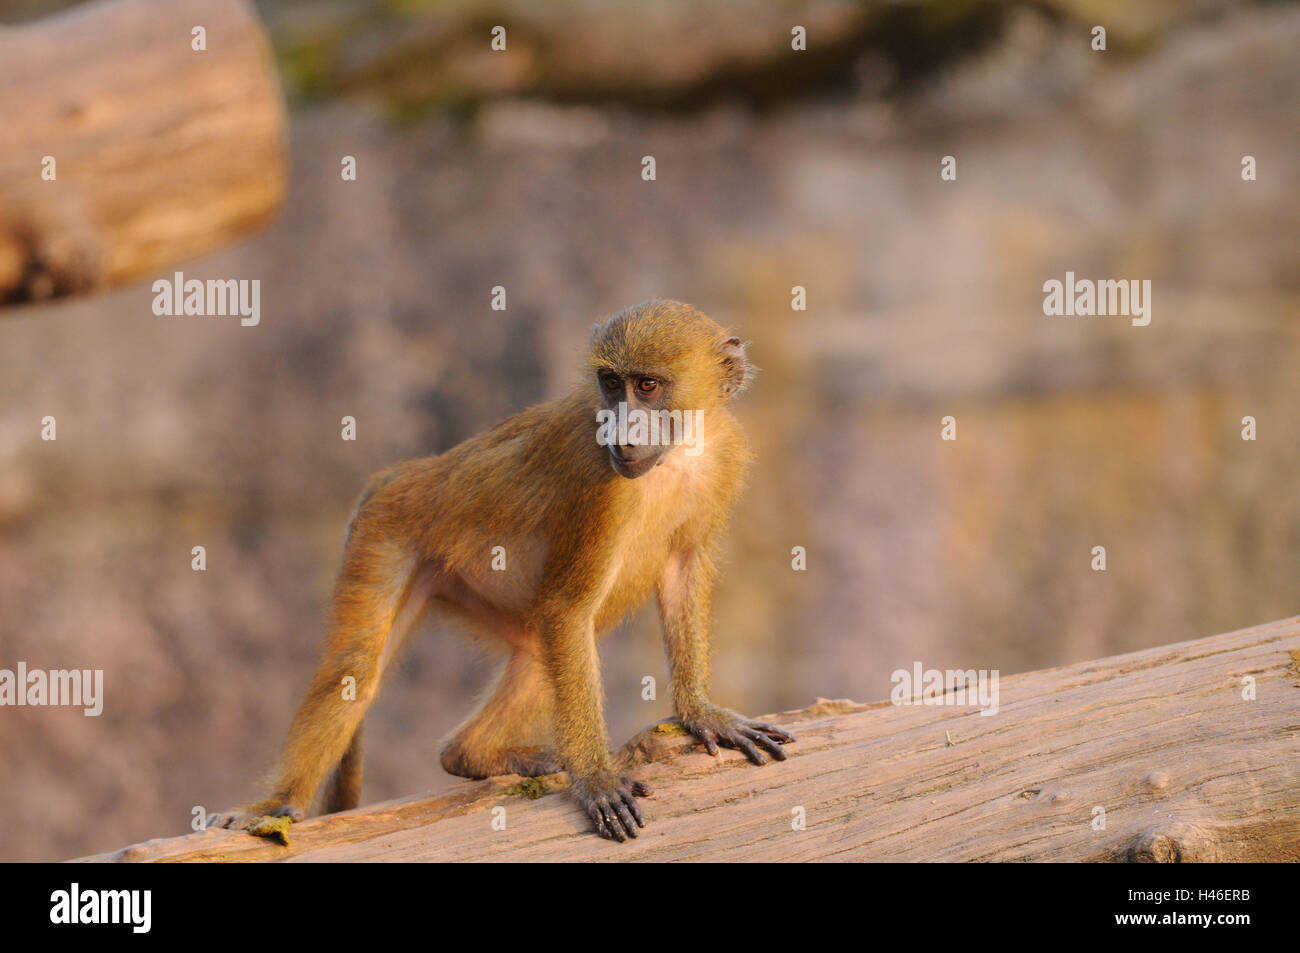 Guinea baboon, Papio papio, young animal, trunk, side view, stand, Stock Photo